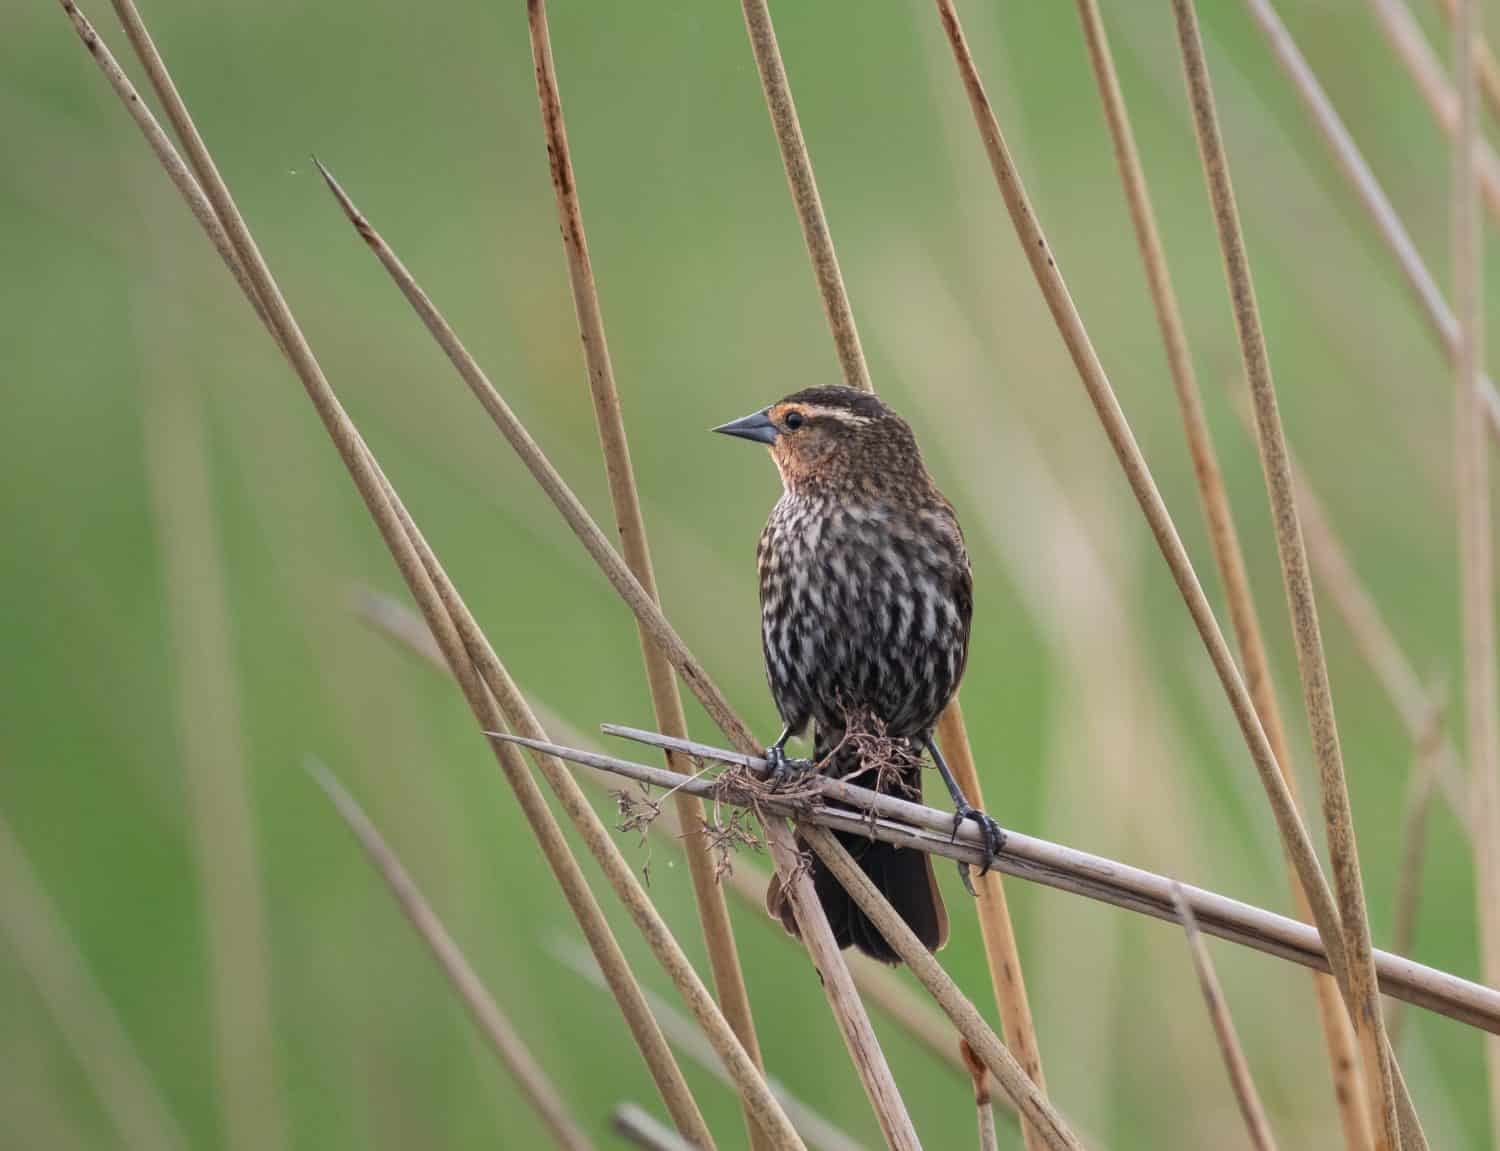 Juvenile White-throated or Seaside Sparrow perched on a dried plant or reed in Fontainebleau State Park, Louisiana